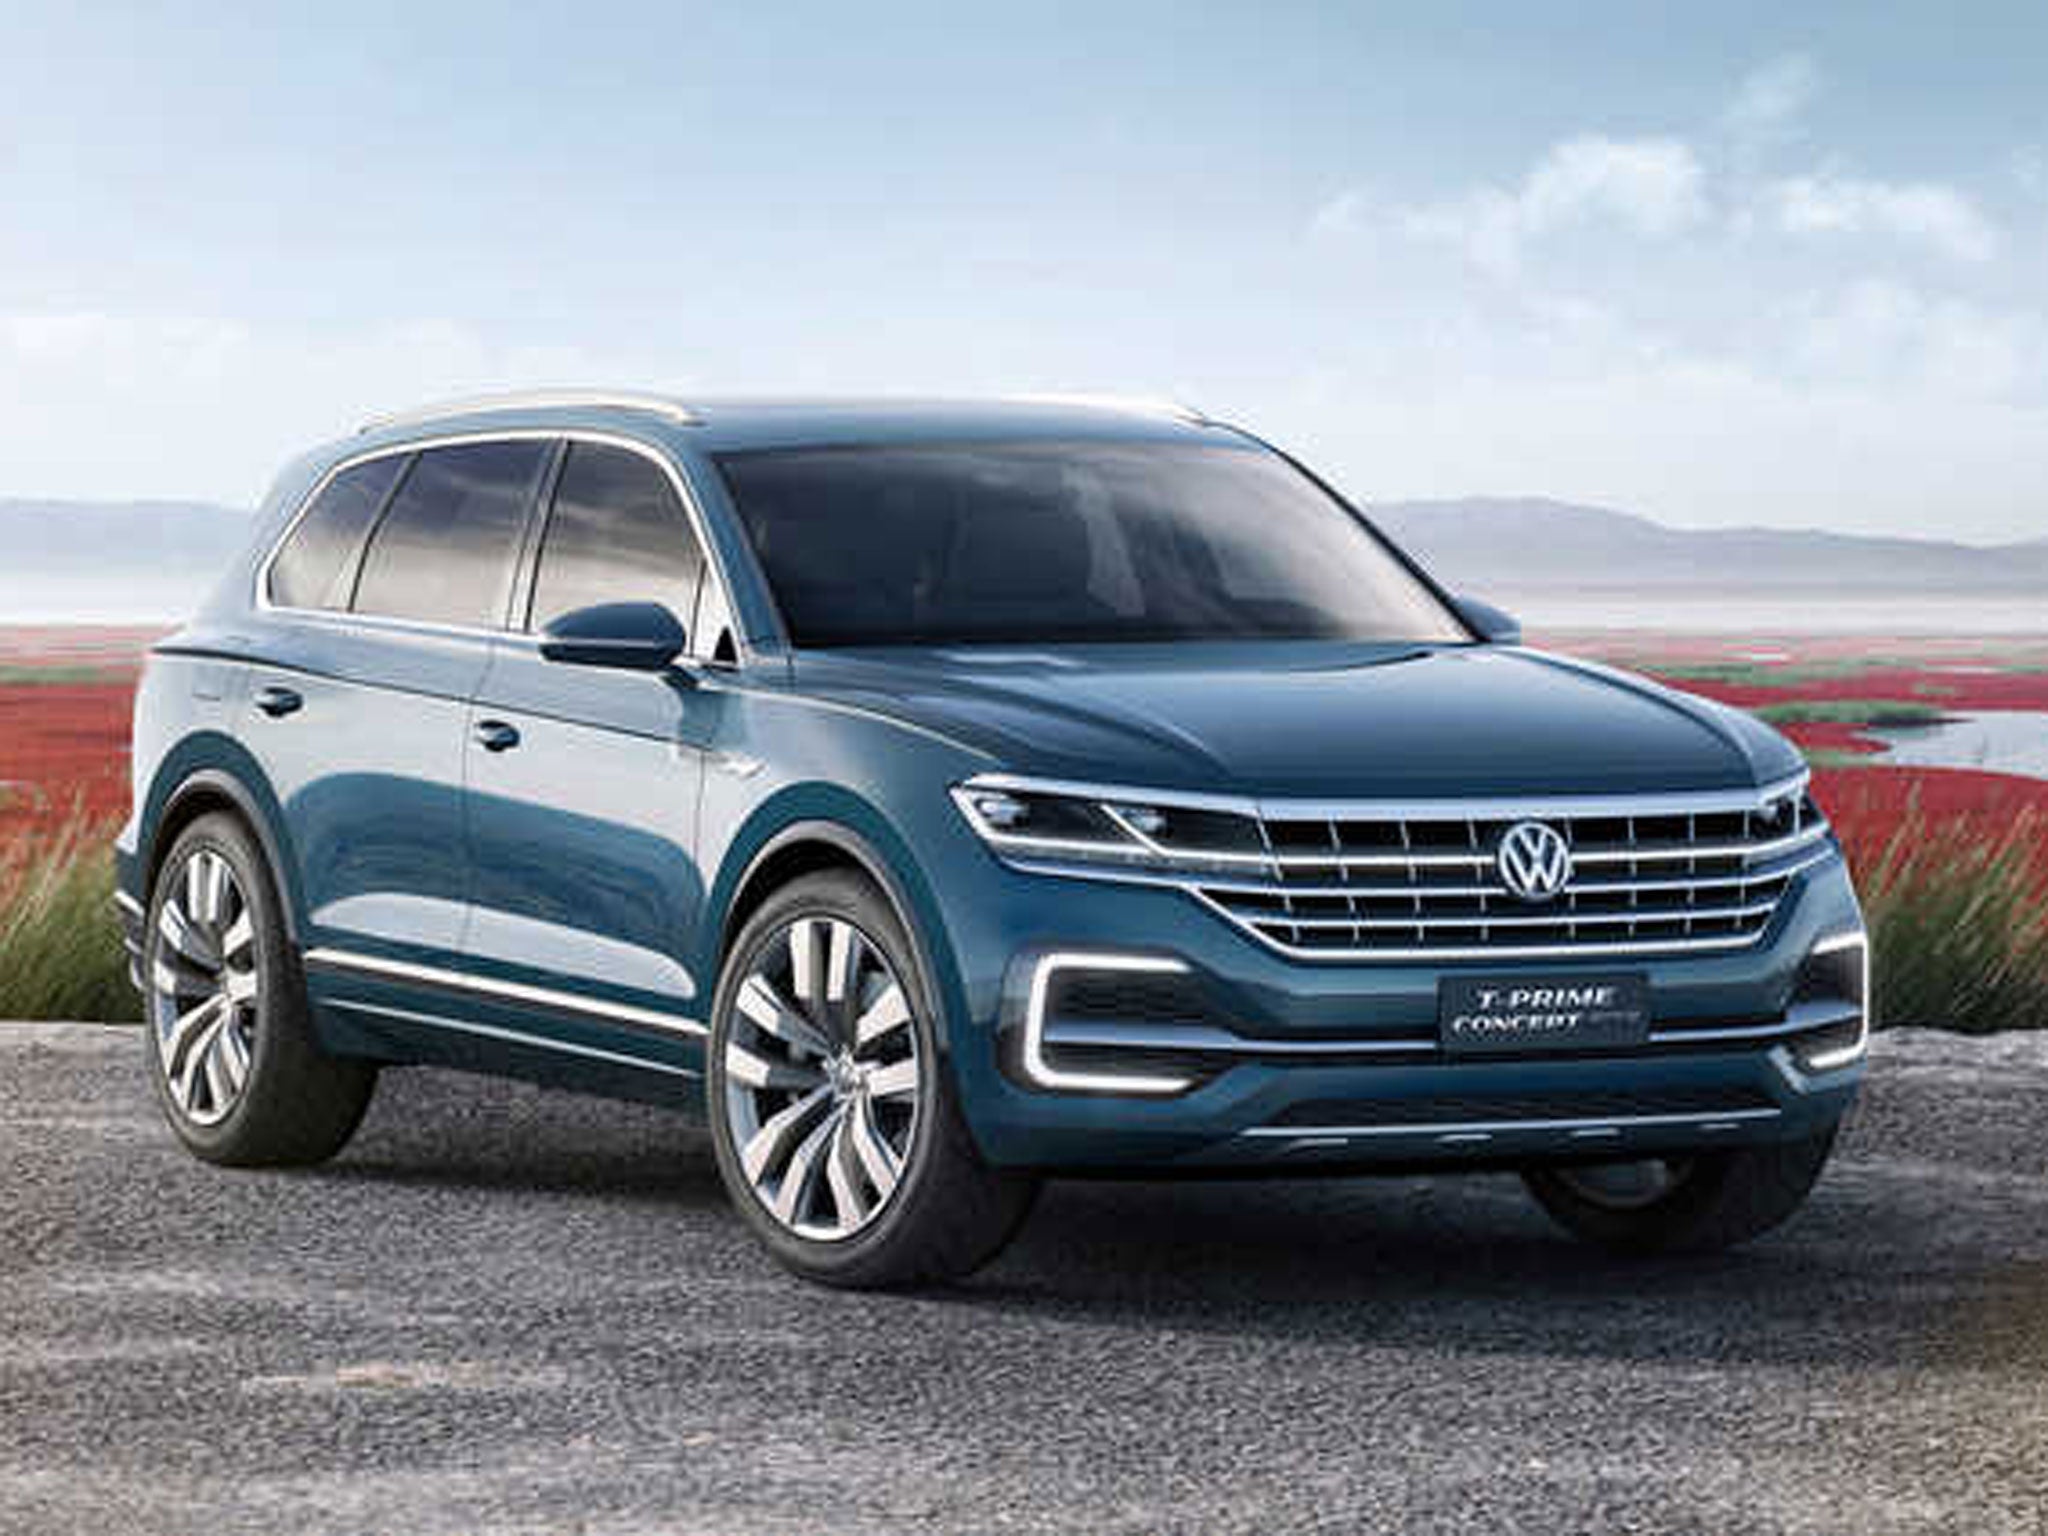 VW claims that because of hybrid power delivery, even this large SUV should be able to manage 104.6mpg